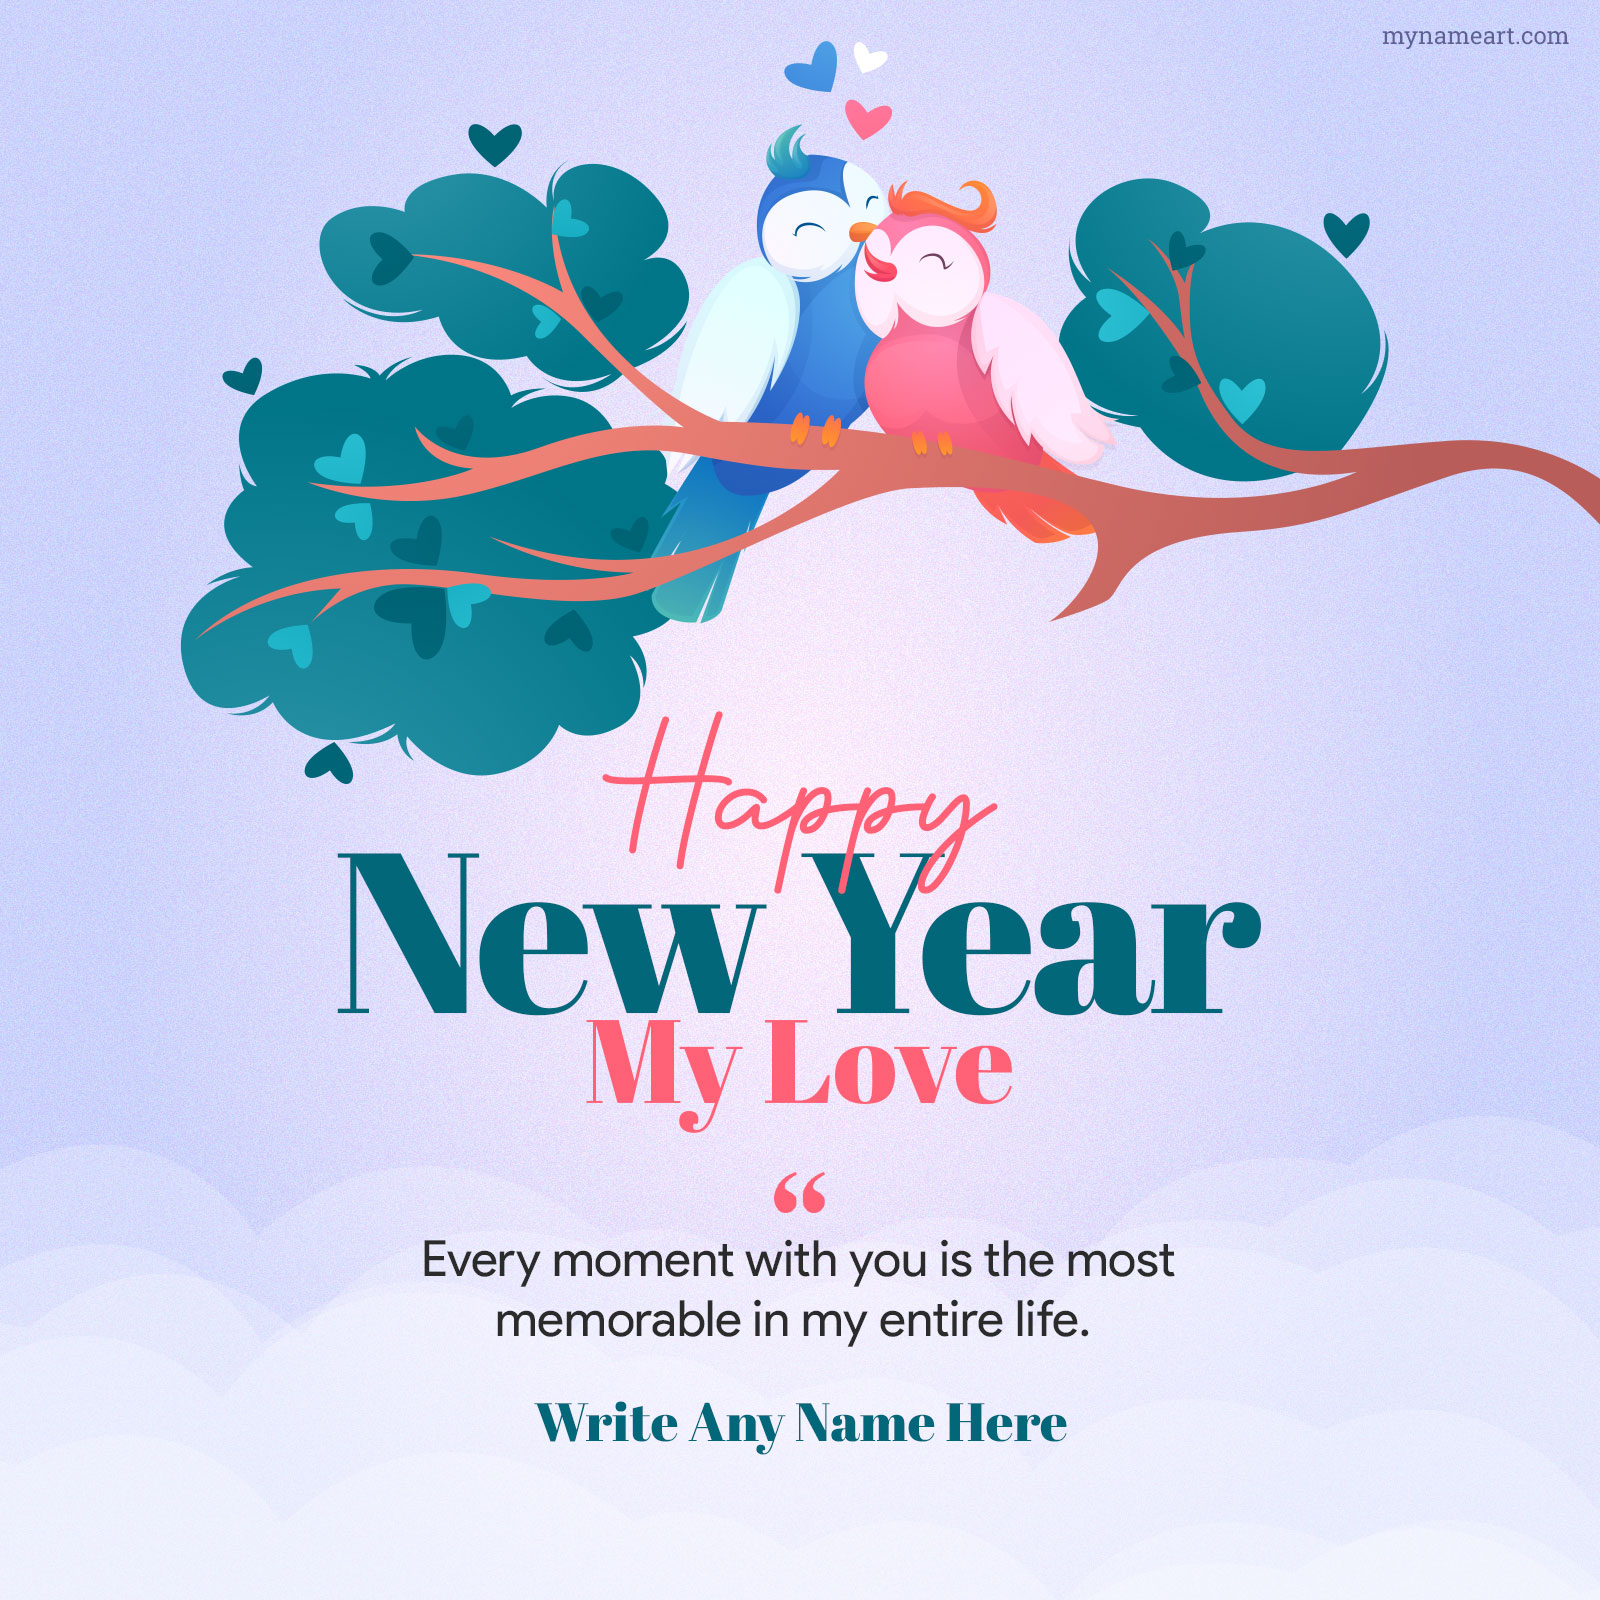 Happy New Year Wishes For My Love, New Year 2023 Wishes For Love